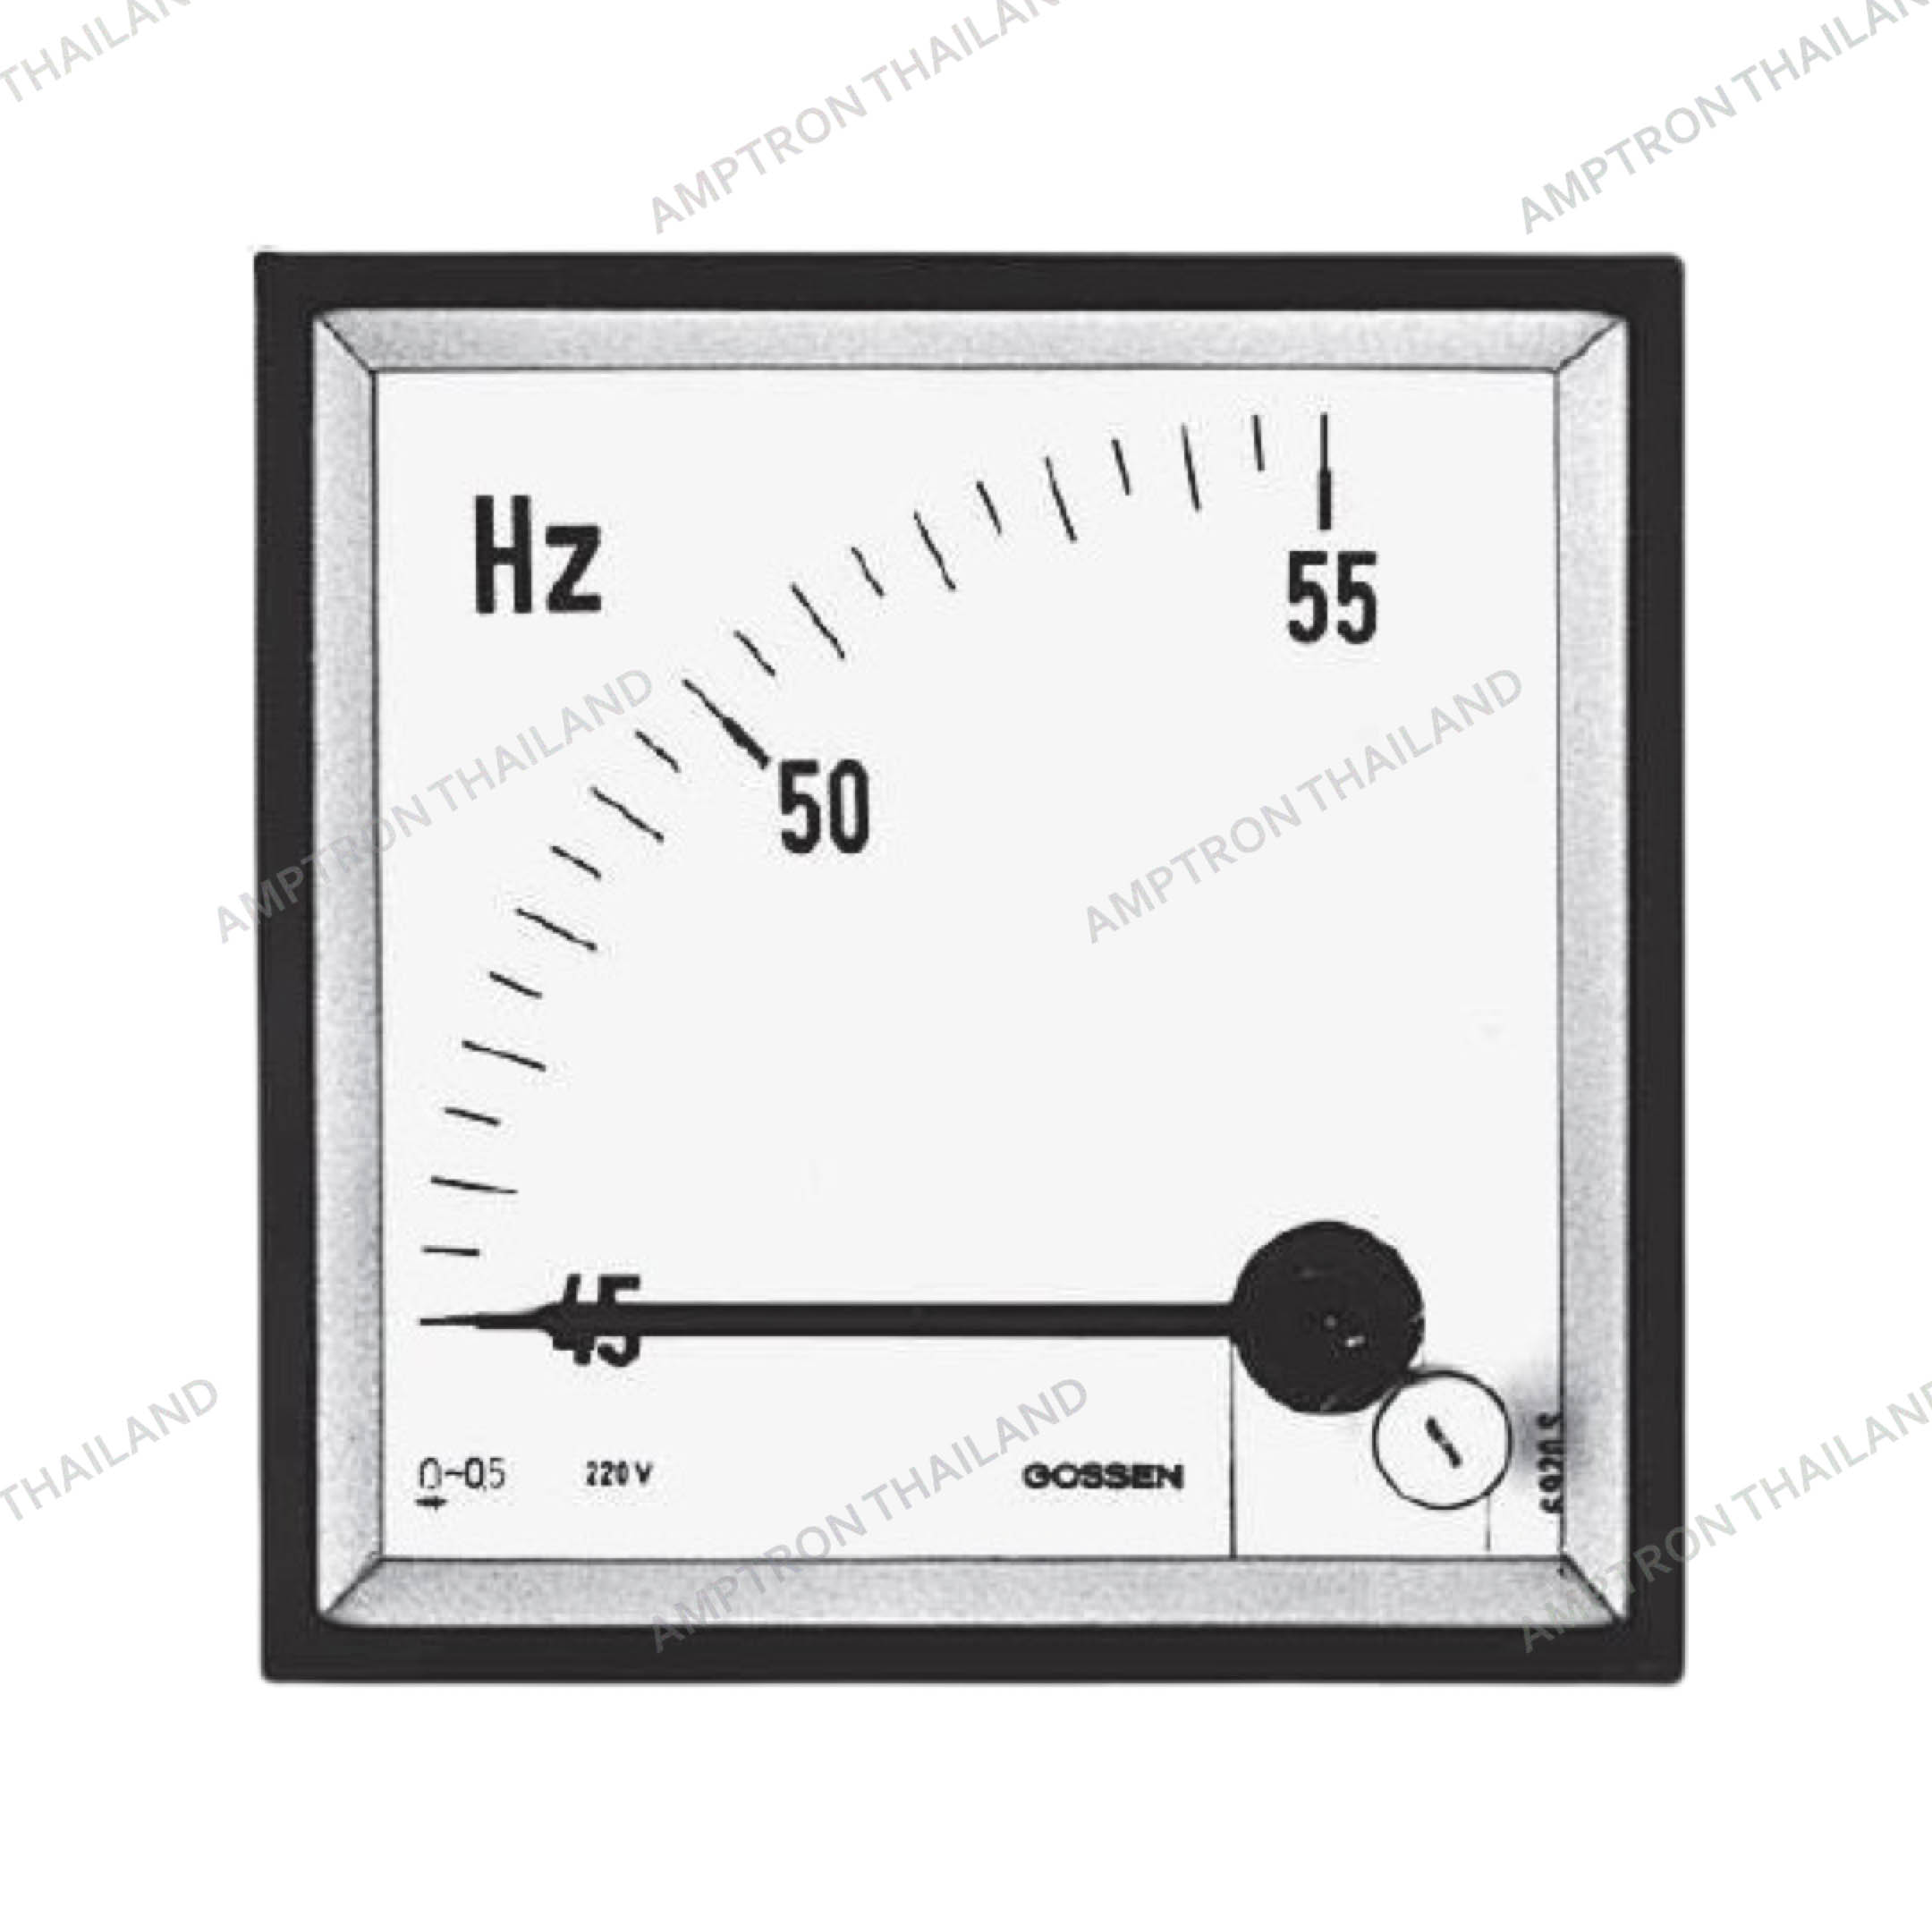 Moving-Coil Panel Meters for Frequency (Pointer-Type Frequency Meters) (V-FZQS)